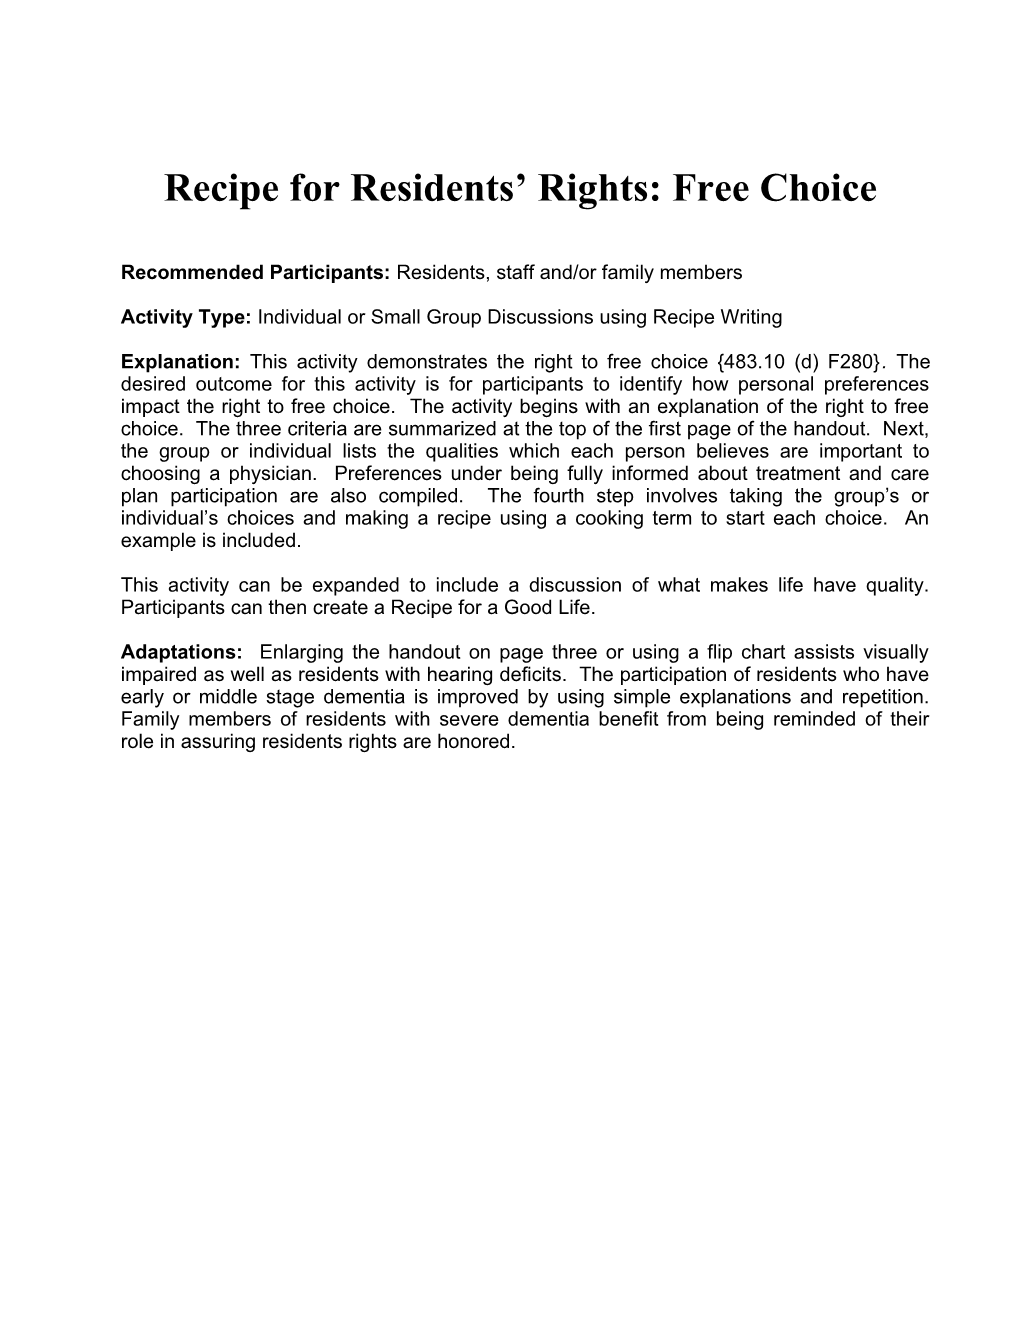 Recipe for Residents Rights: Free Choice